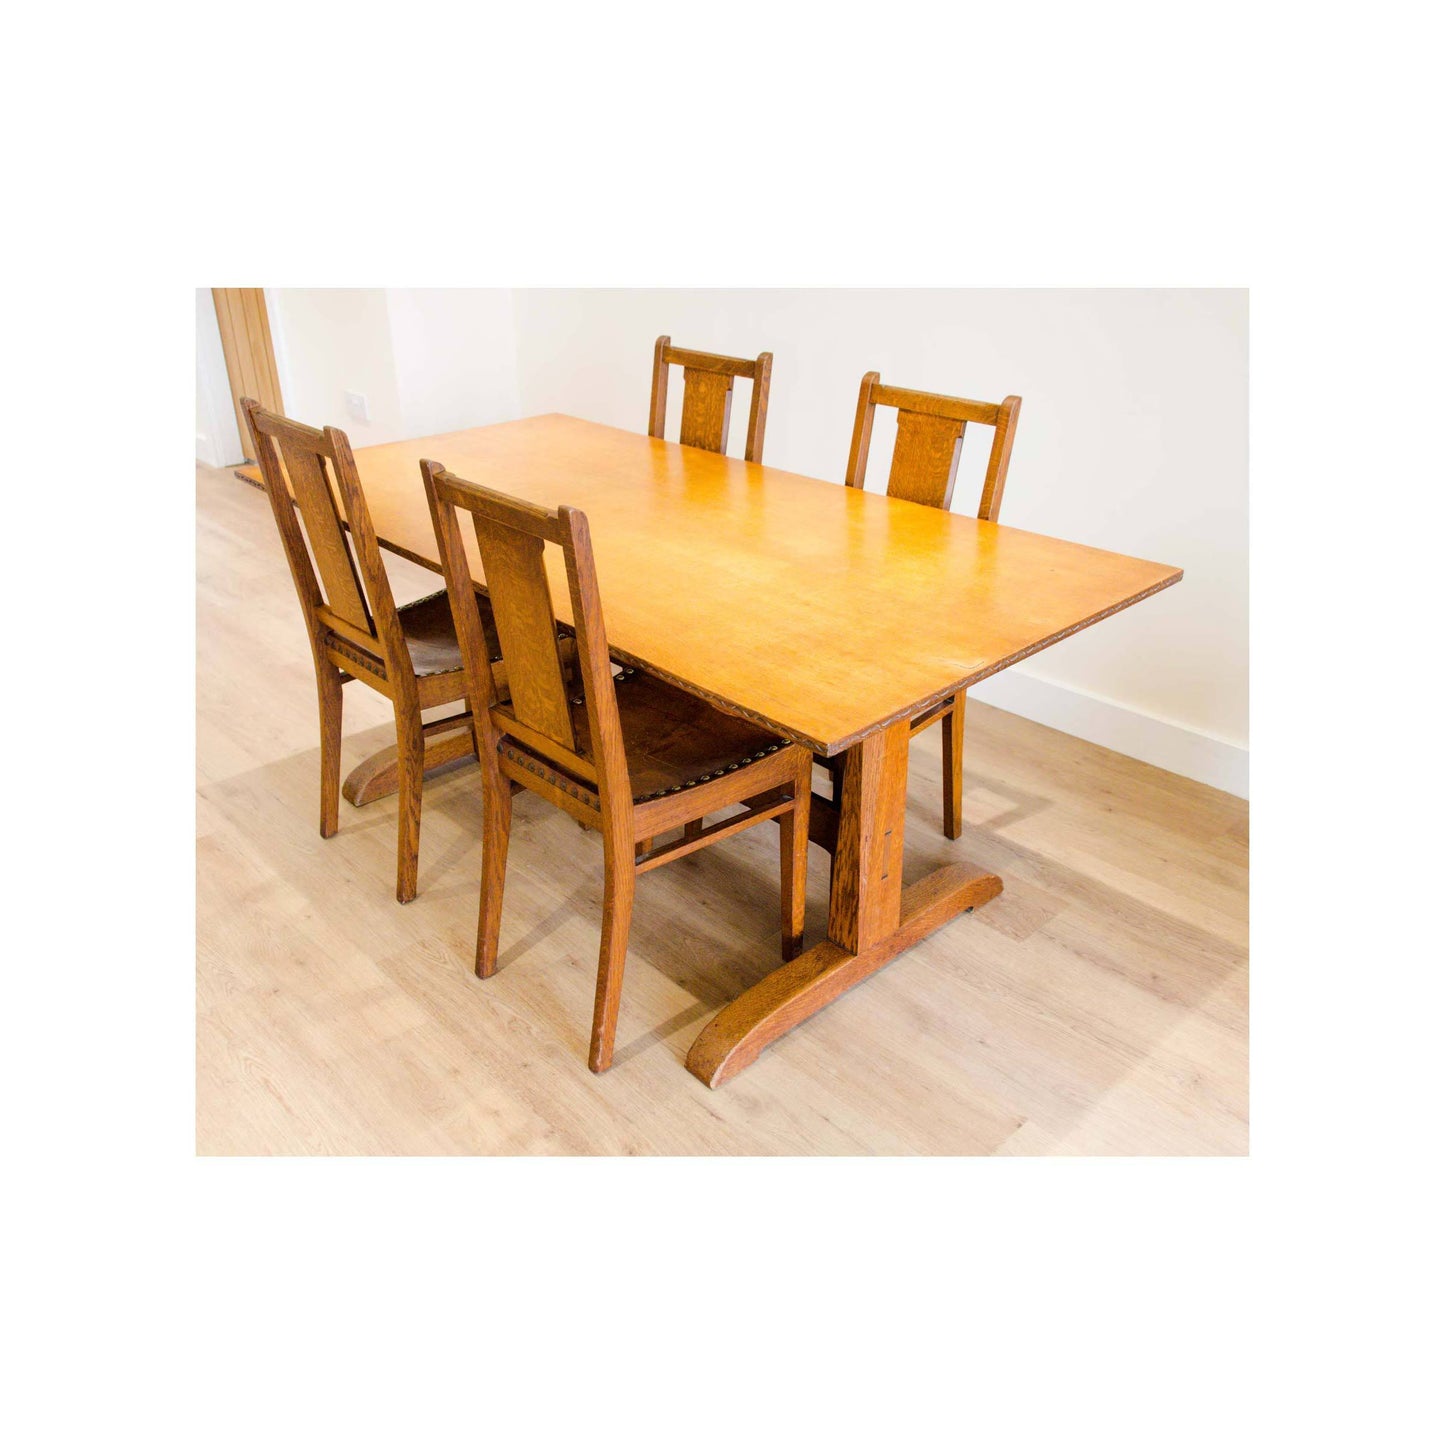 Arthur W Simpson (The Handicrafts, Kendal) Arthur W. Simpson Arts Crafts Solid Oak Dining Table and 4 Chairs